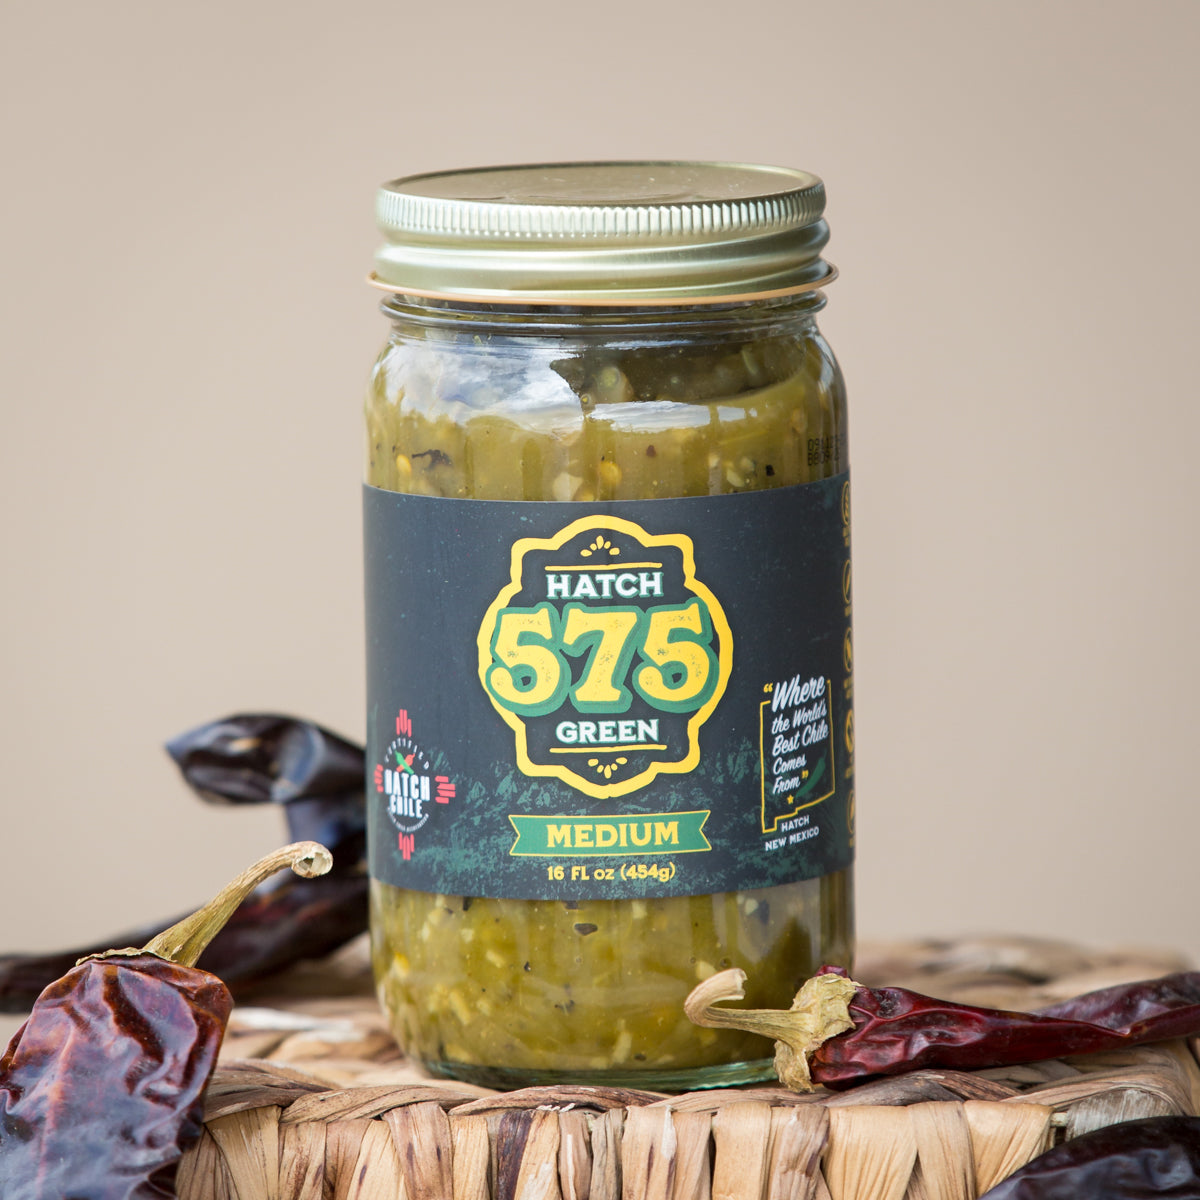 A jar of Hatch 575 Green Chile Sauce labeled "medium" on a table, surrounded by dried chili peppers, with a warm beige background.